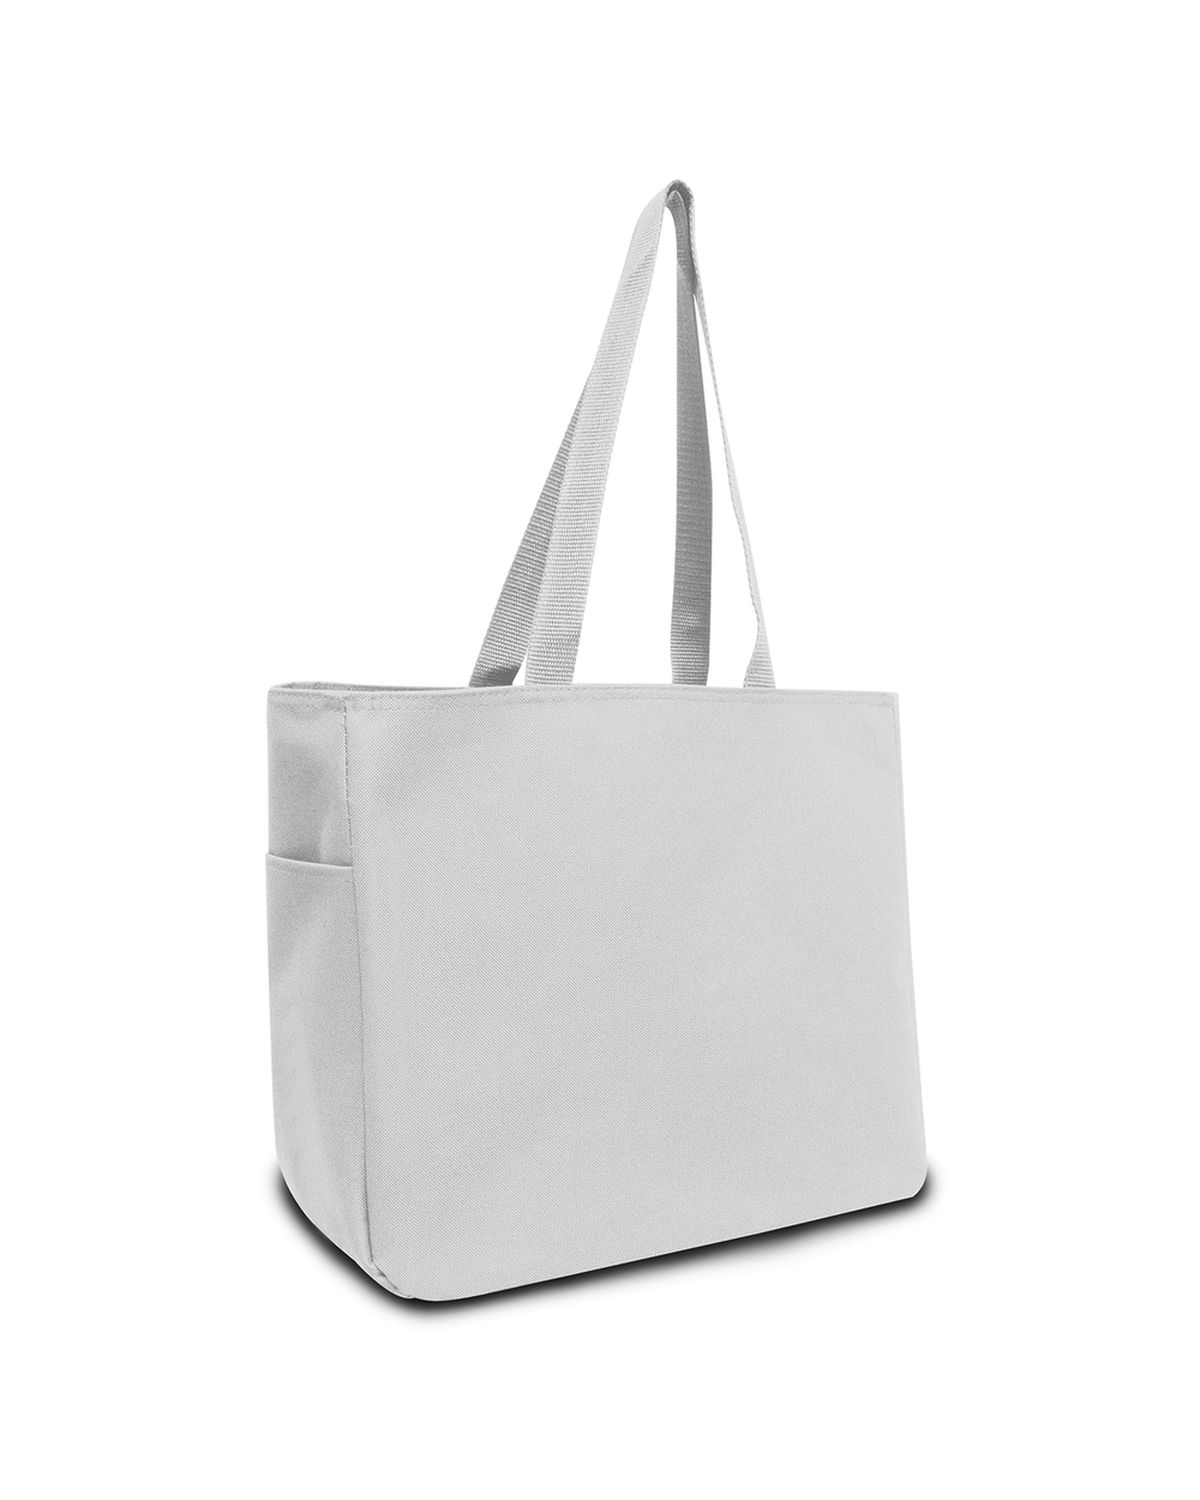 'Liberty Bags 8815 Must Have Tote'